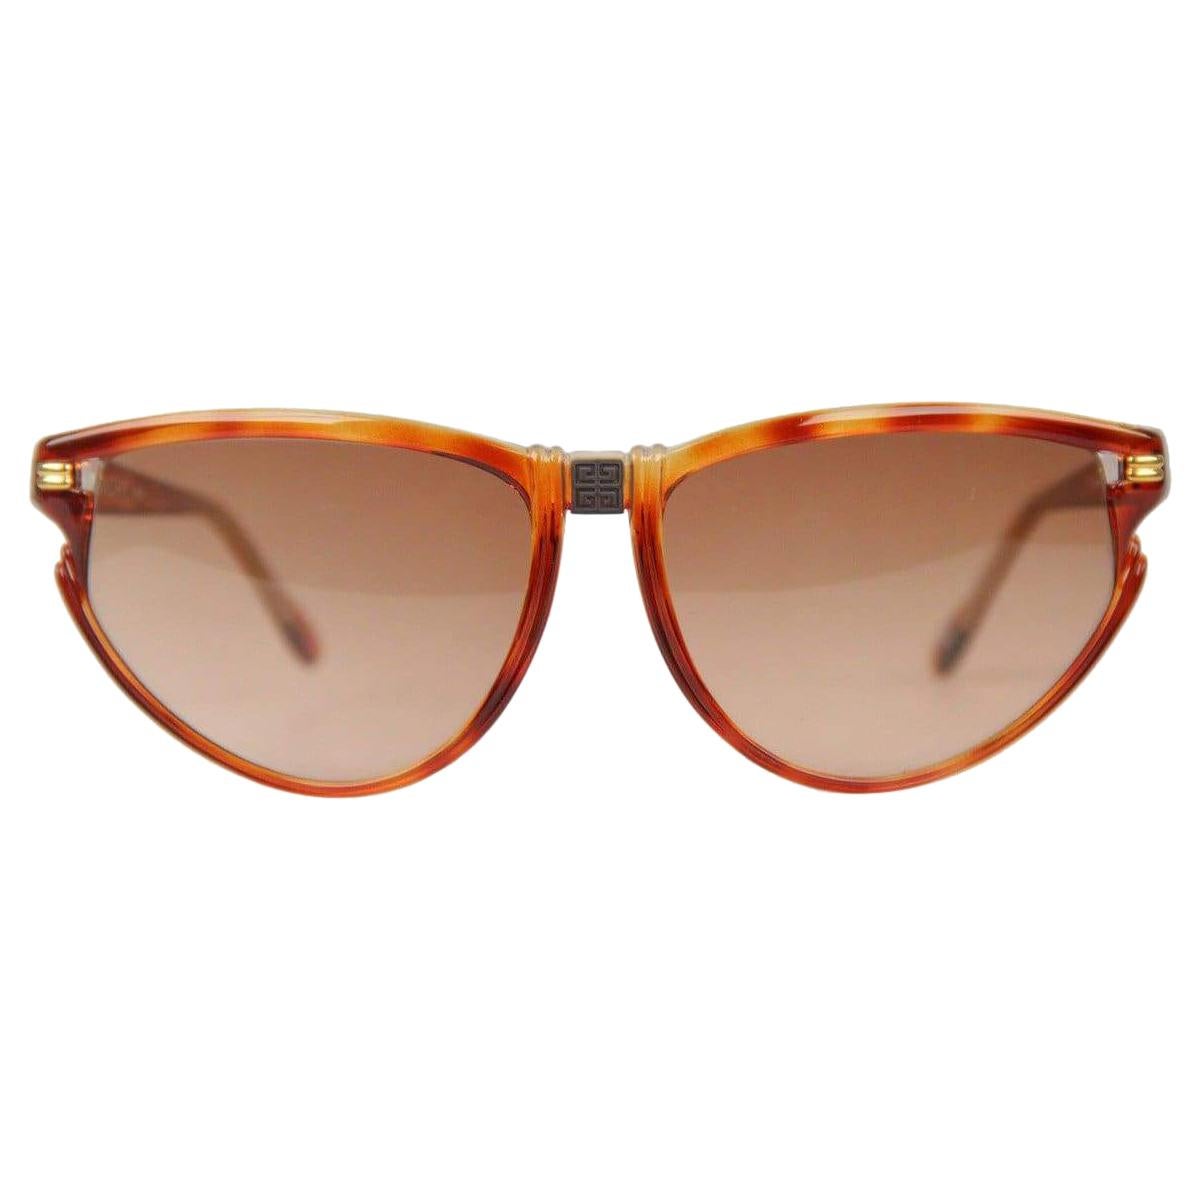 Givenchy Vintage Brown Sunglasses SG01 COL 02